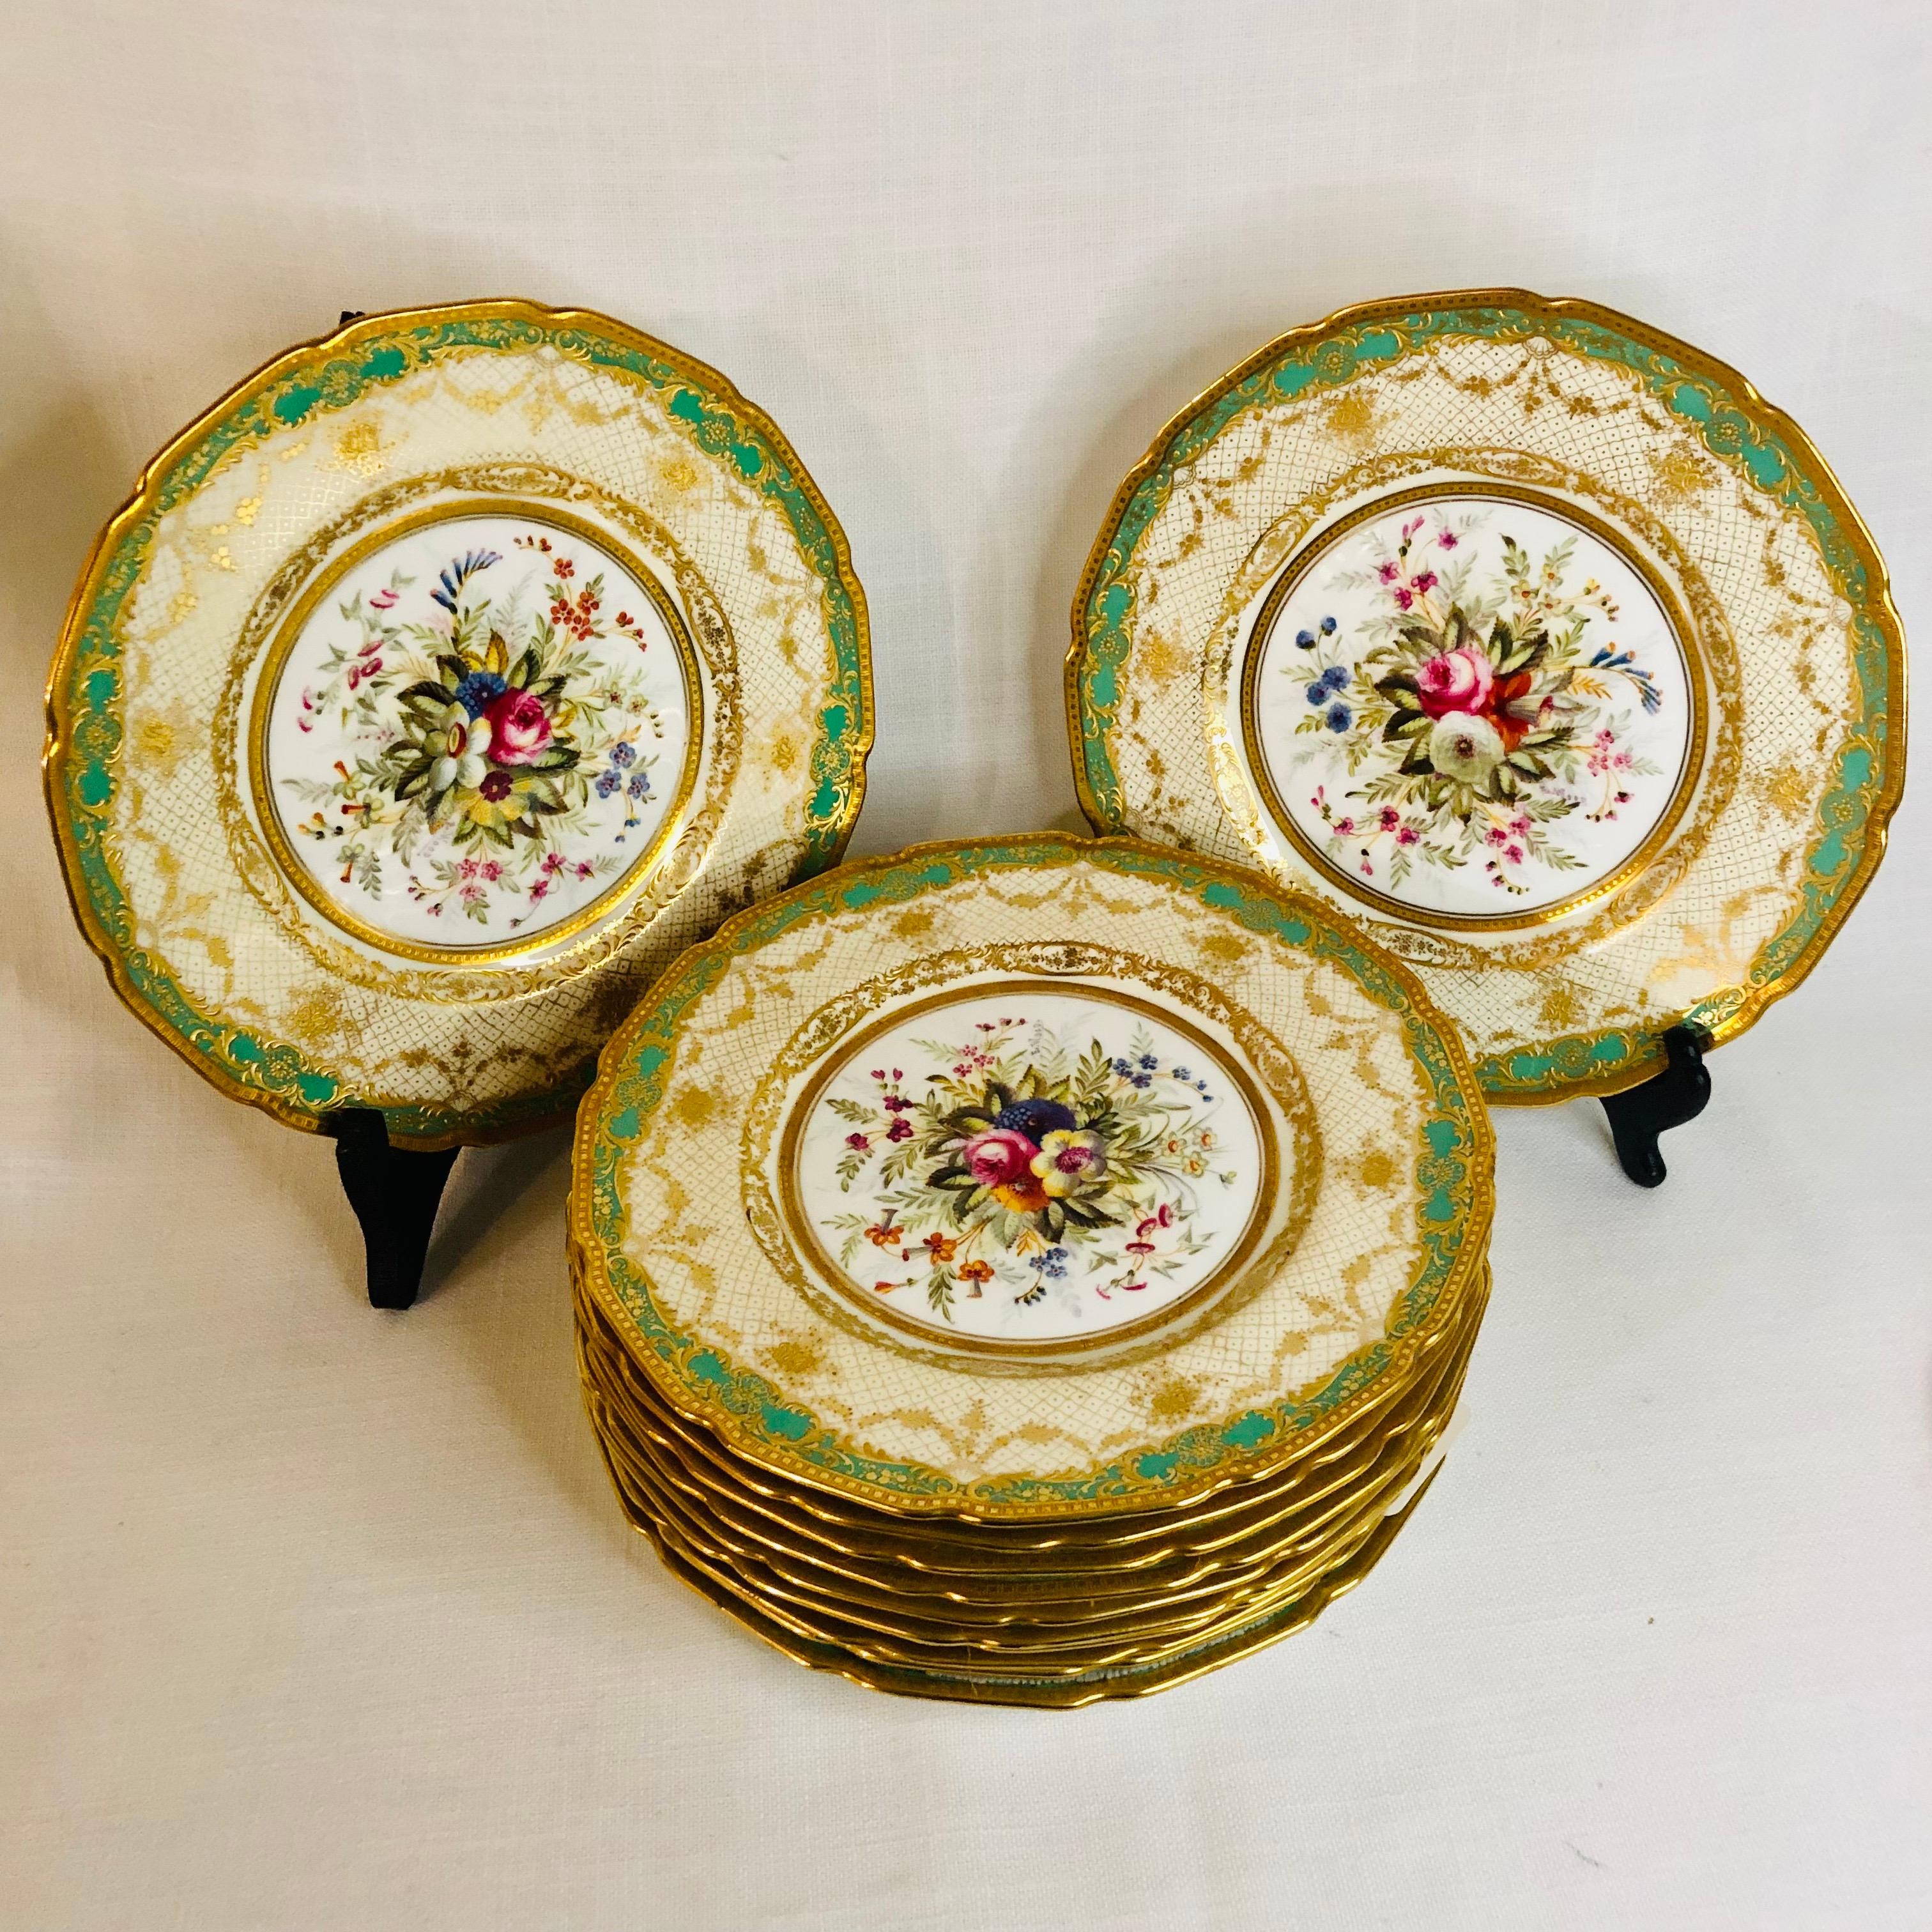 I am offering you this exquisite set of twelve Royal Doulton museum quality plates artist signed E. Wood. Each plate is painted beautifully with different bouquets of flowers with raised gilded ribbon accents around the inside of the green and gold